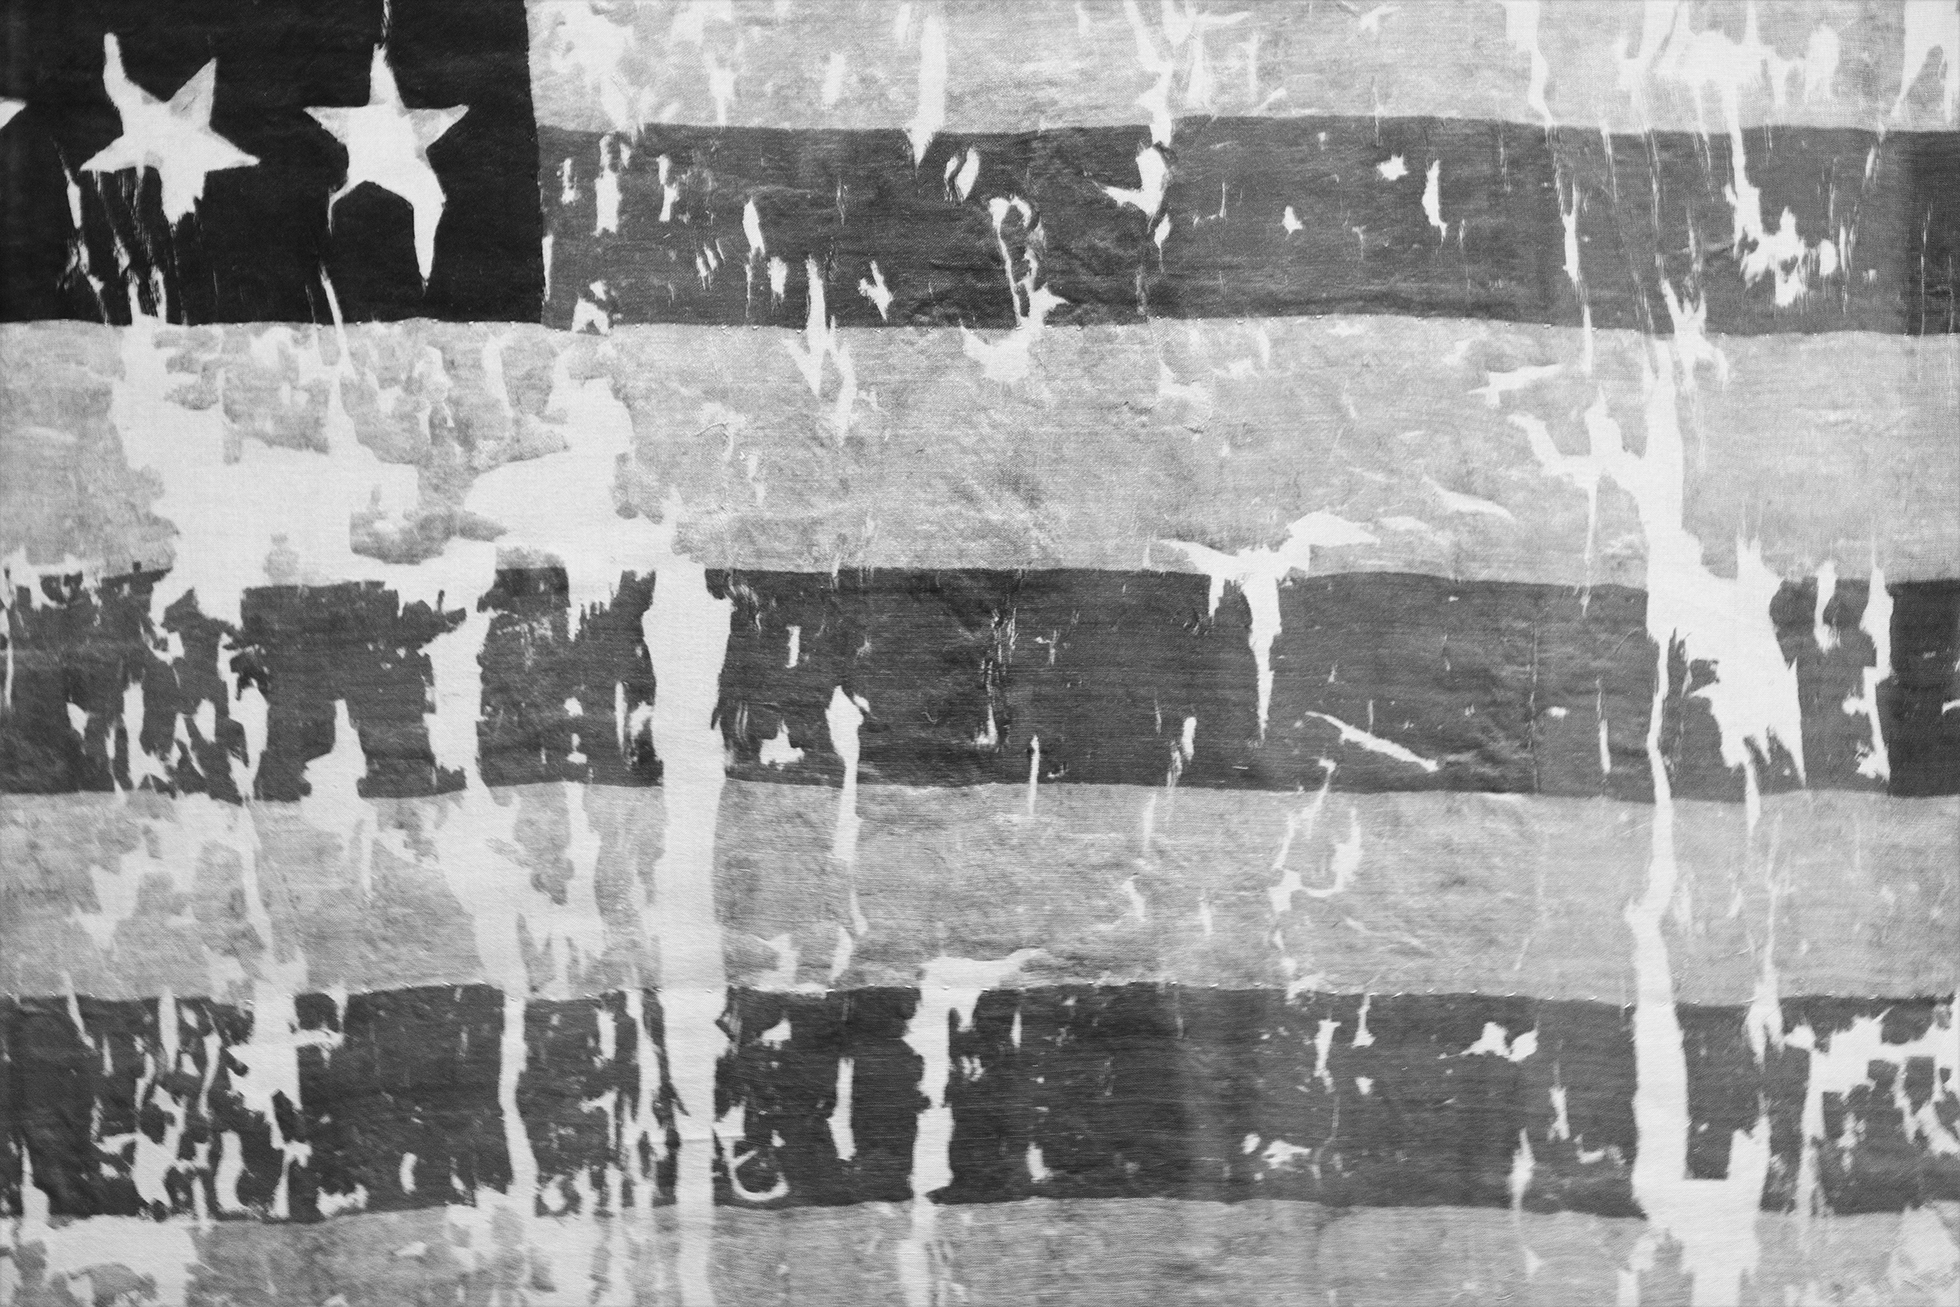 A close-up of a battered and torn American flag from the 1800s.